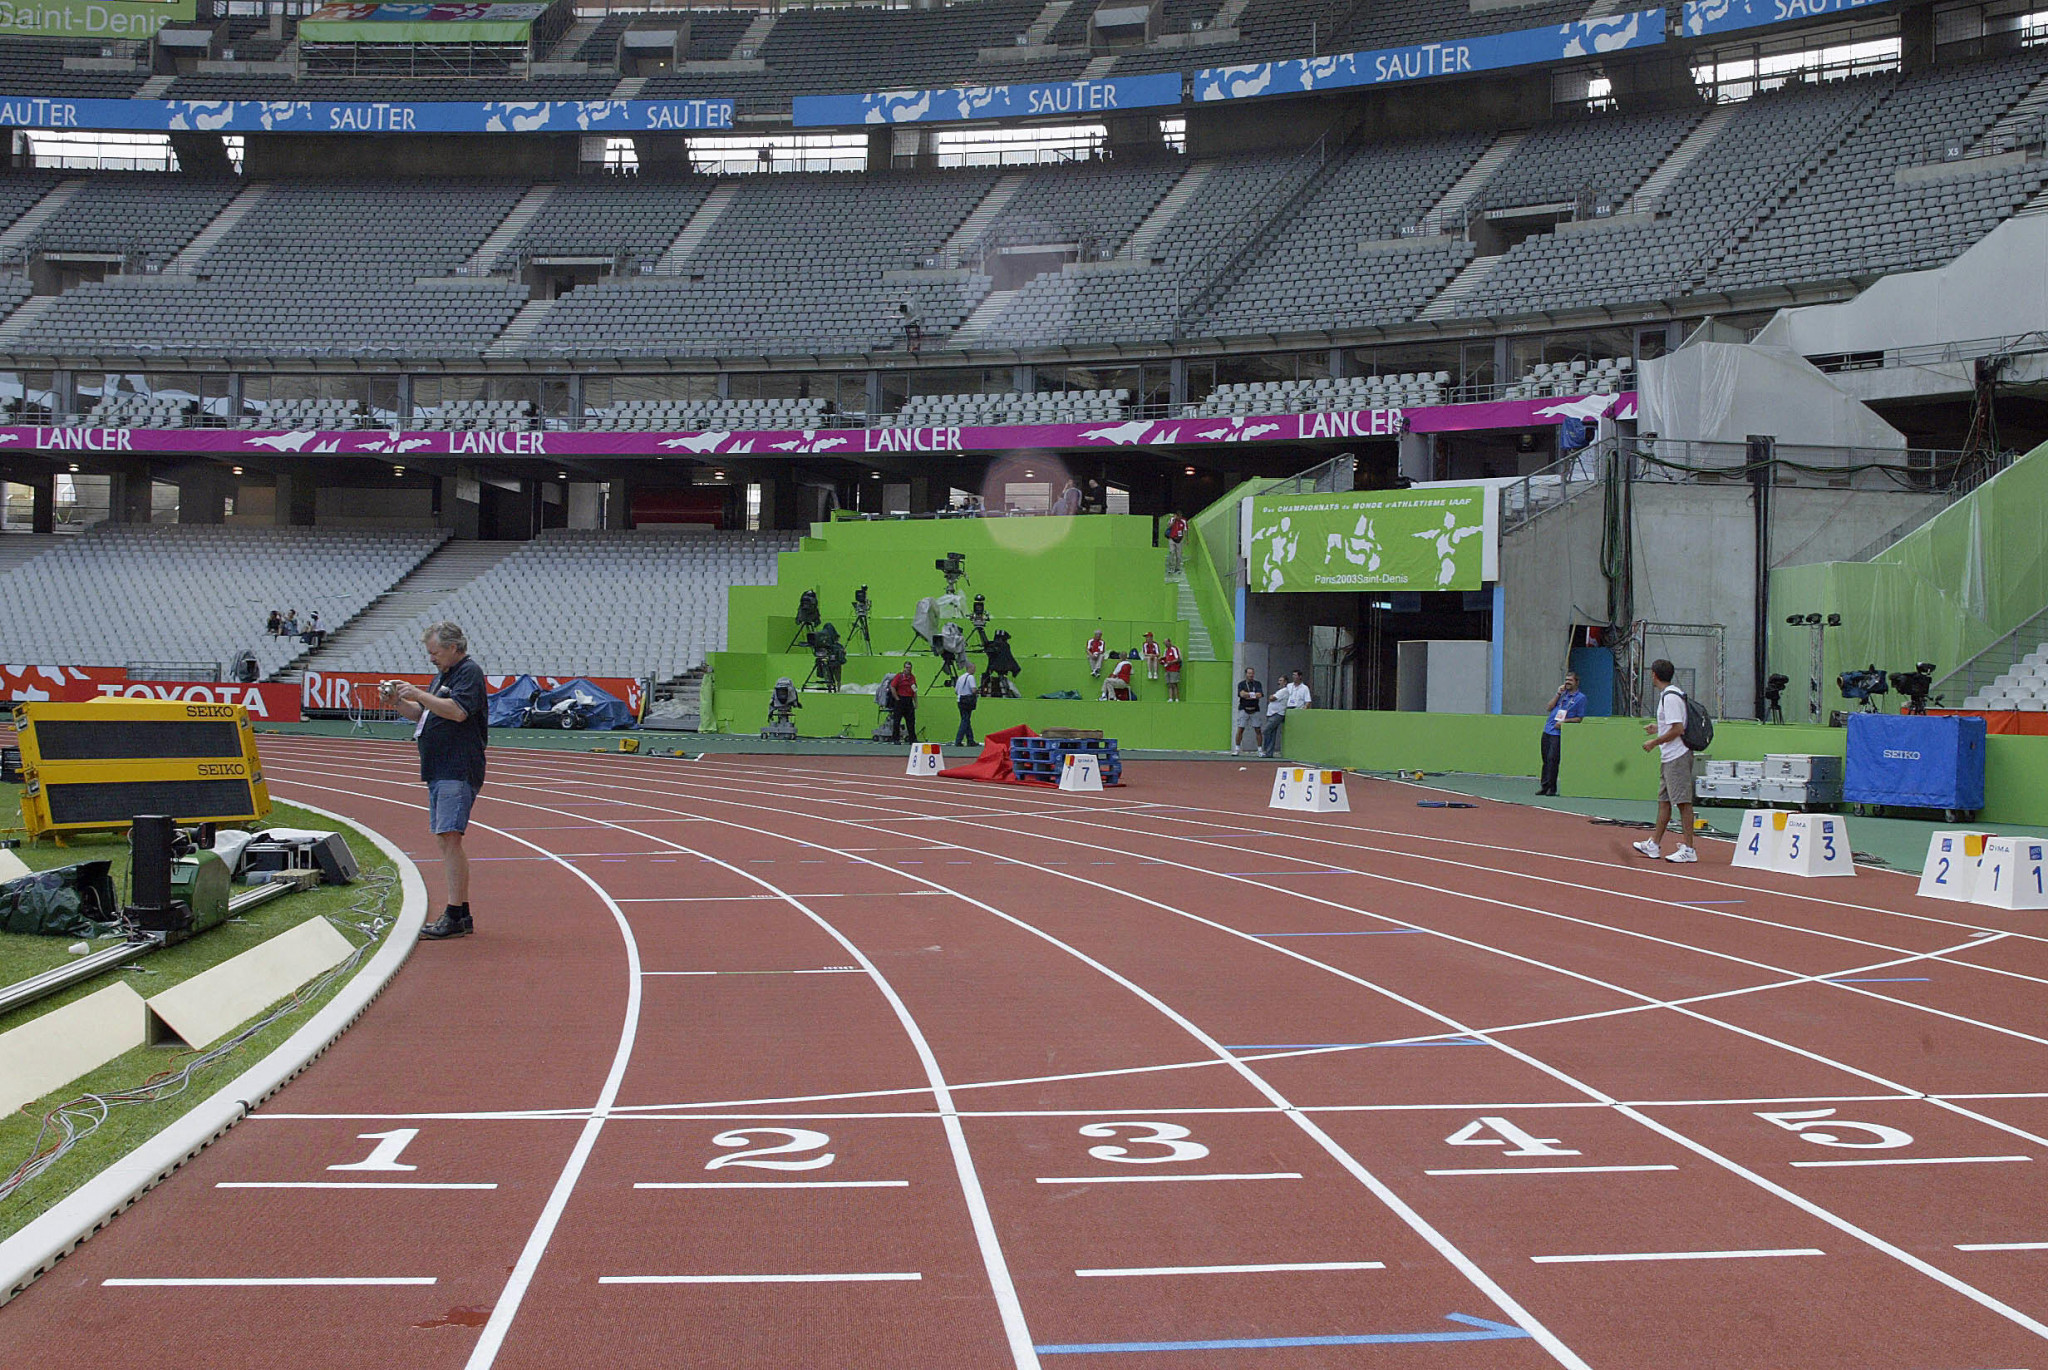 A running track for the Stade de France, a former World Athletics Championships host, needs to be installed for the Olympic Games ©Getty Images